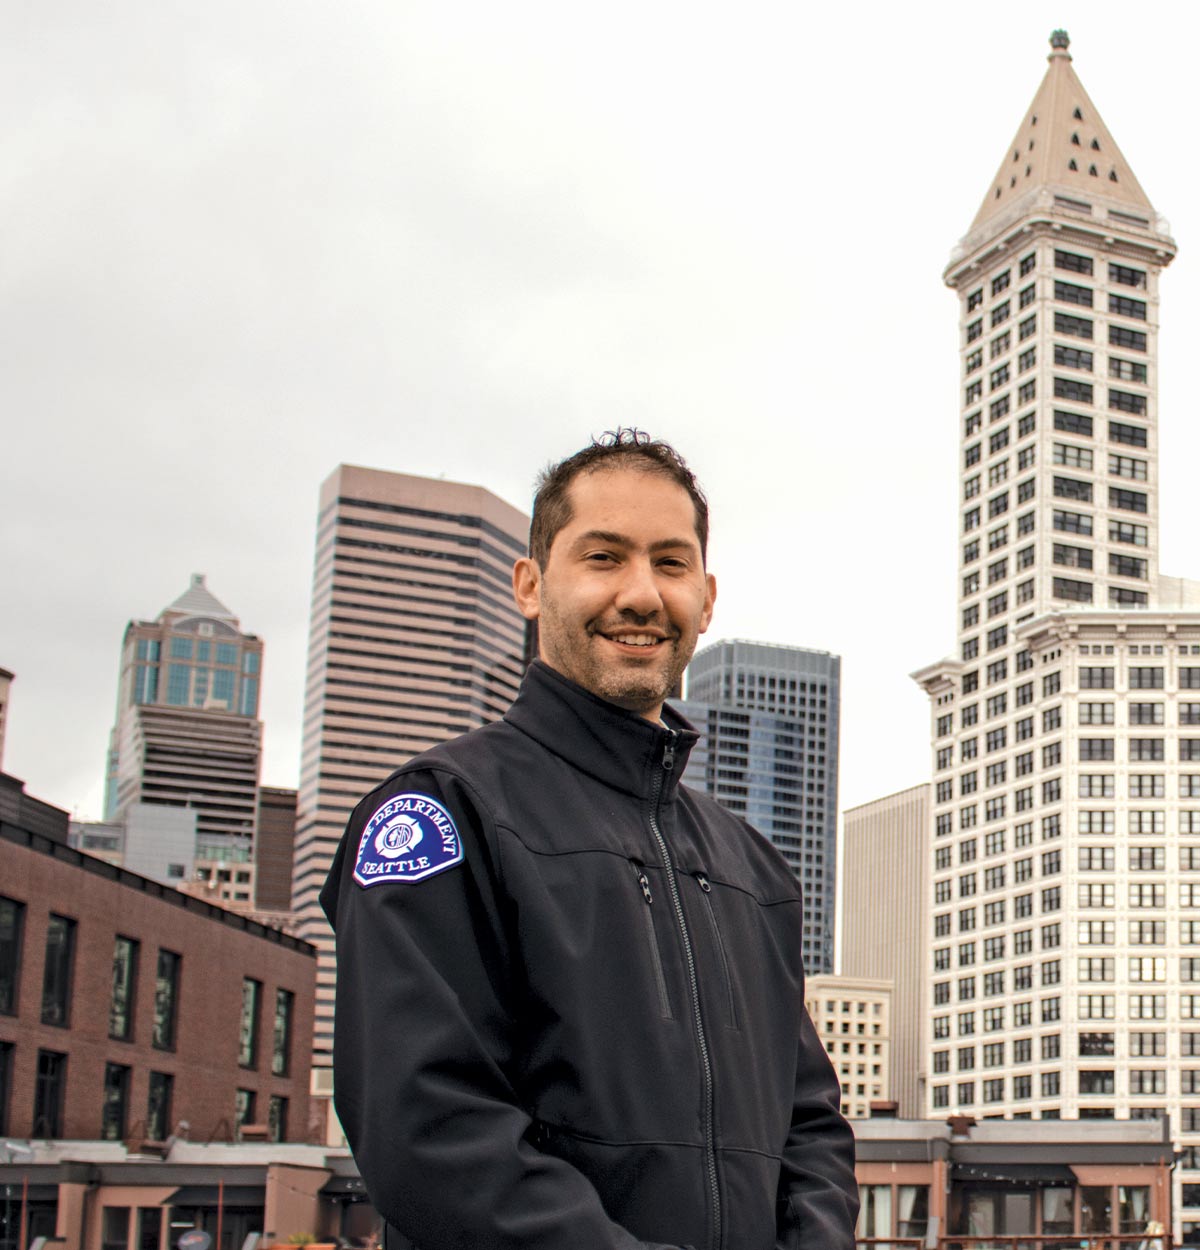 Jon Ehrenfeld outside in a downtown area with buildings in the background. He’s wearing black jacket with a “Fire Department Seattle” patch on the arm.